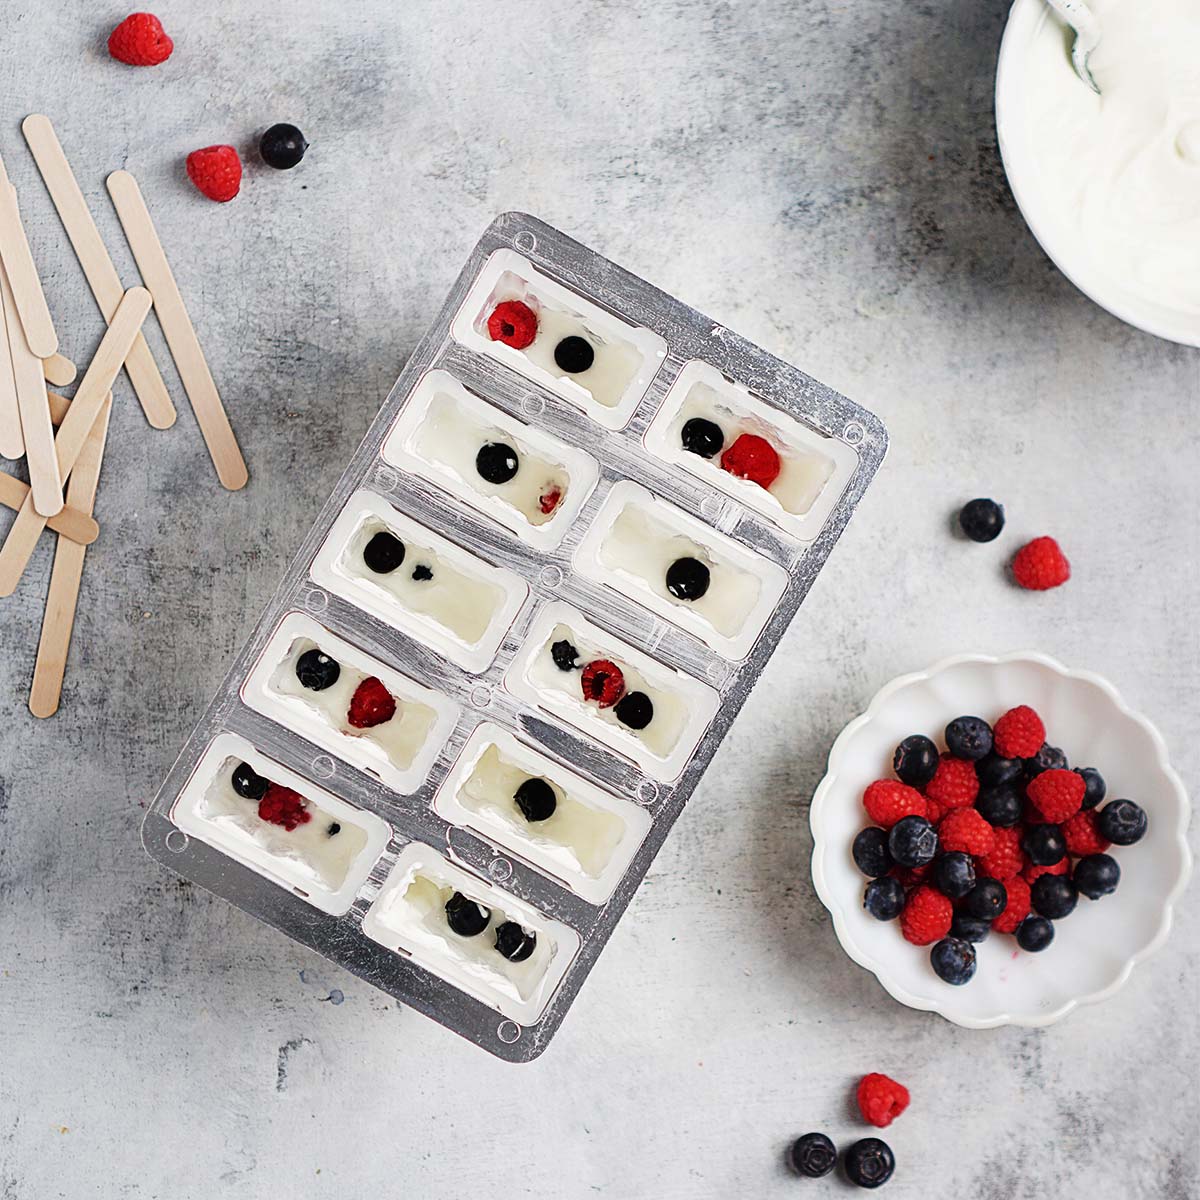 Mix on popsicle molds with berries.